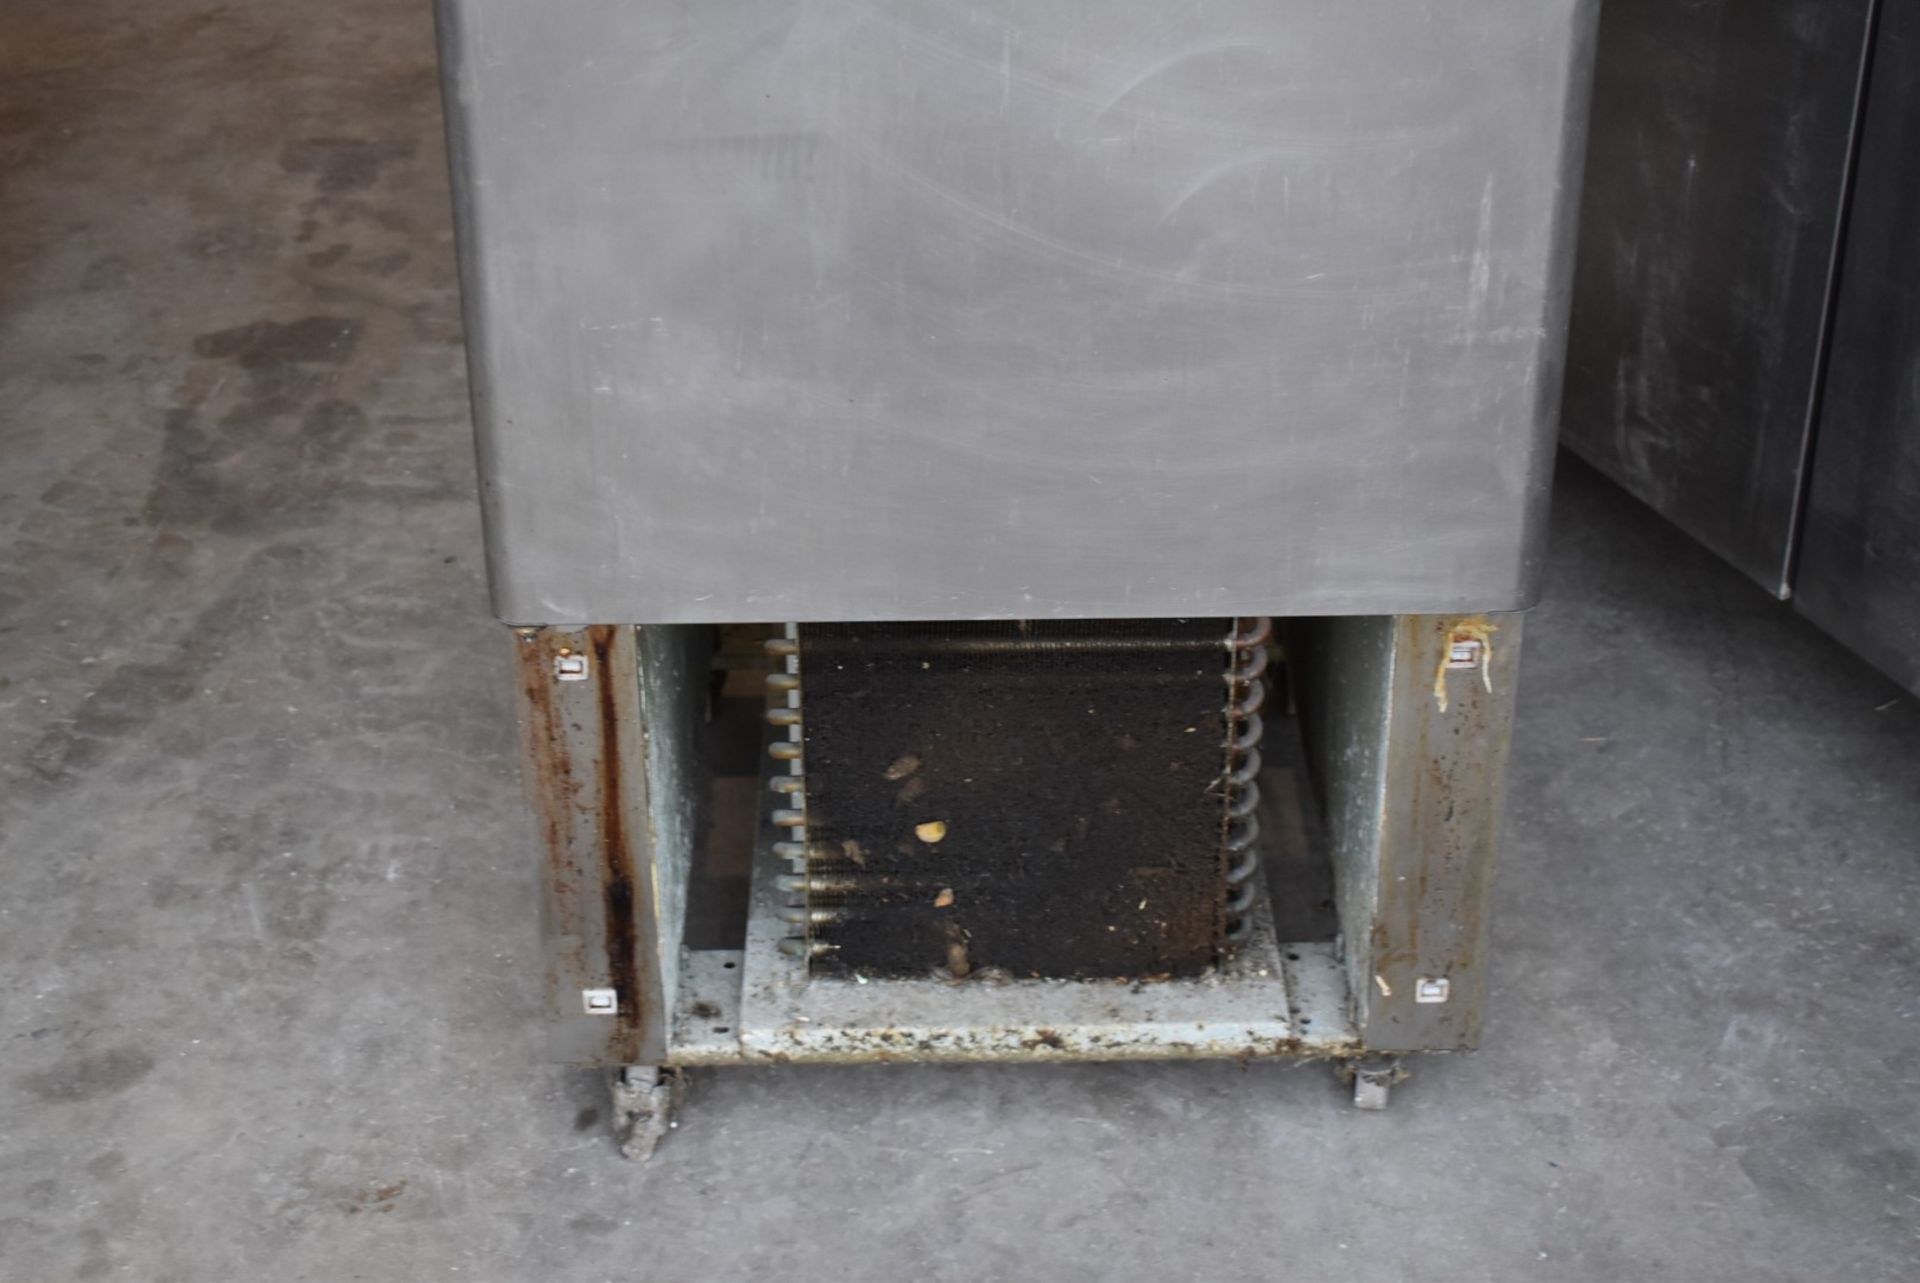 1 x Williams HZ12 Upright Single Door Refrigerator - Recently Removed From a Working Environment - - Image 2 of 8